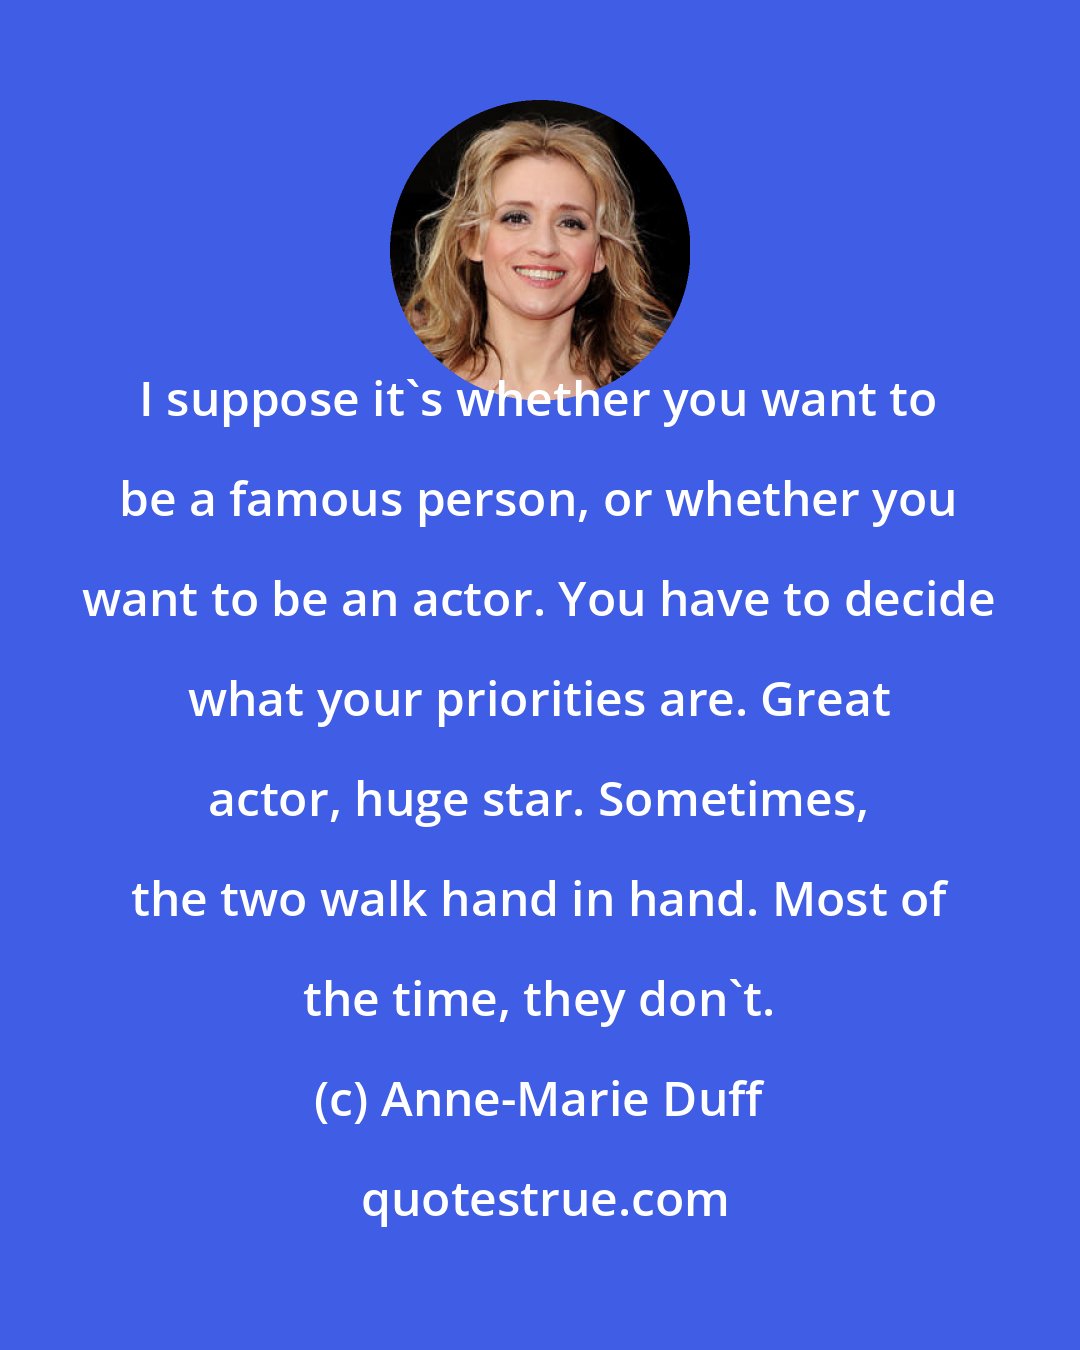 Anne-Marie Duff: I suppose it's whether you want to be a famous person, or whether you want to be an actor. You have to decide what your priorities are. Great actor, huge star. Sometimes, the two walk hand in hand. Most of the time, they don't.